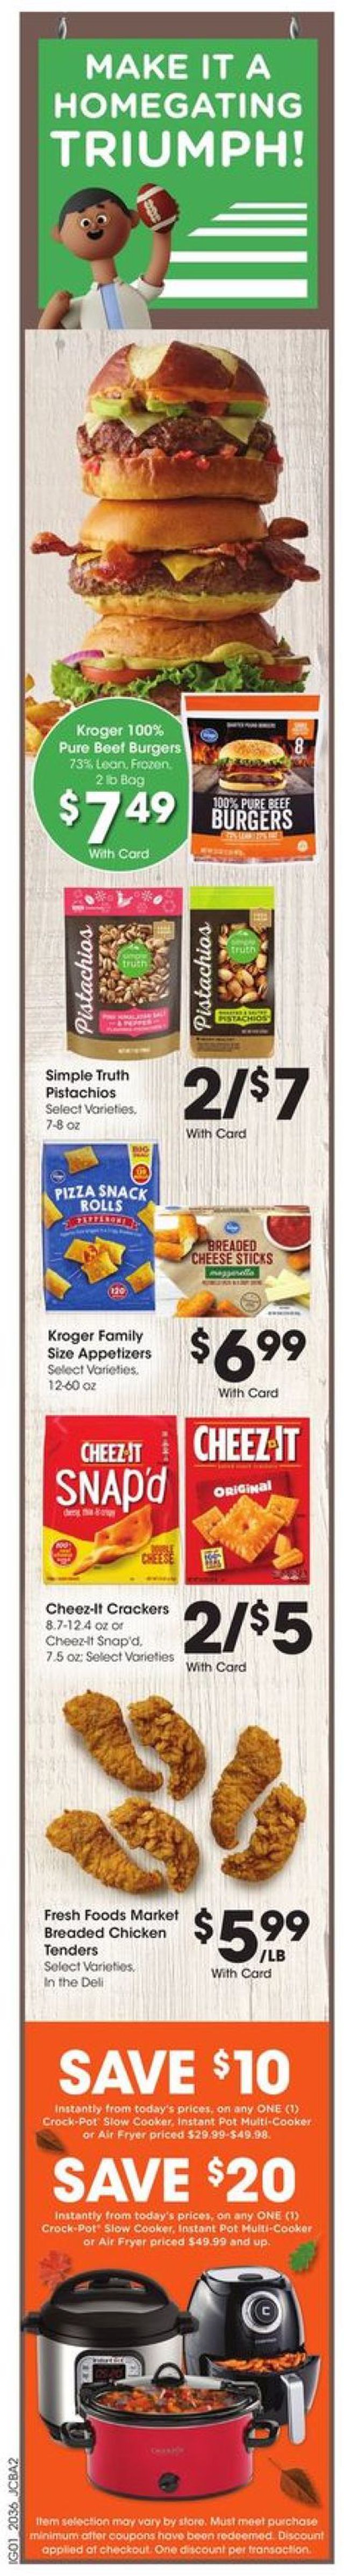 Jay C Food Stores Ad from 10/07/2020